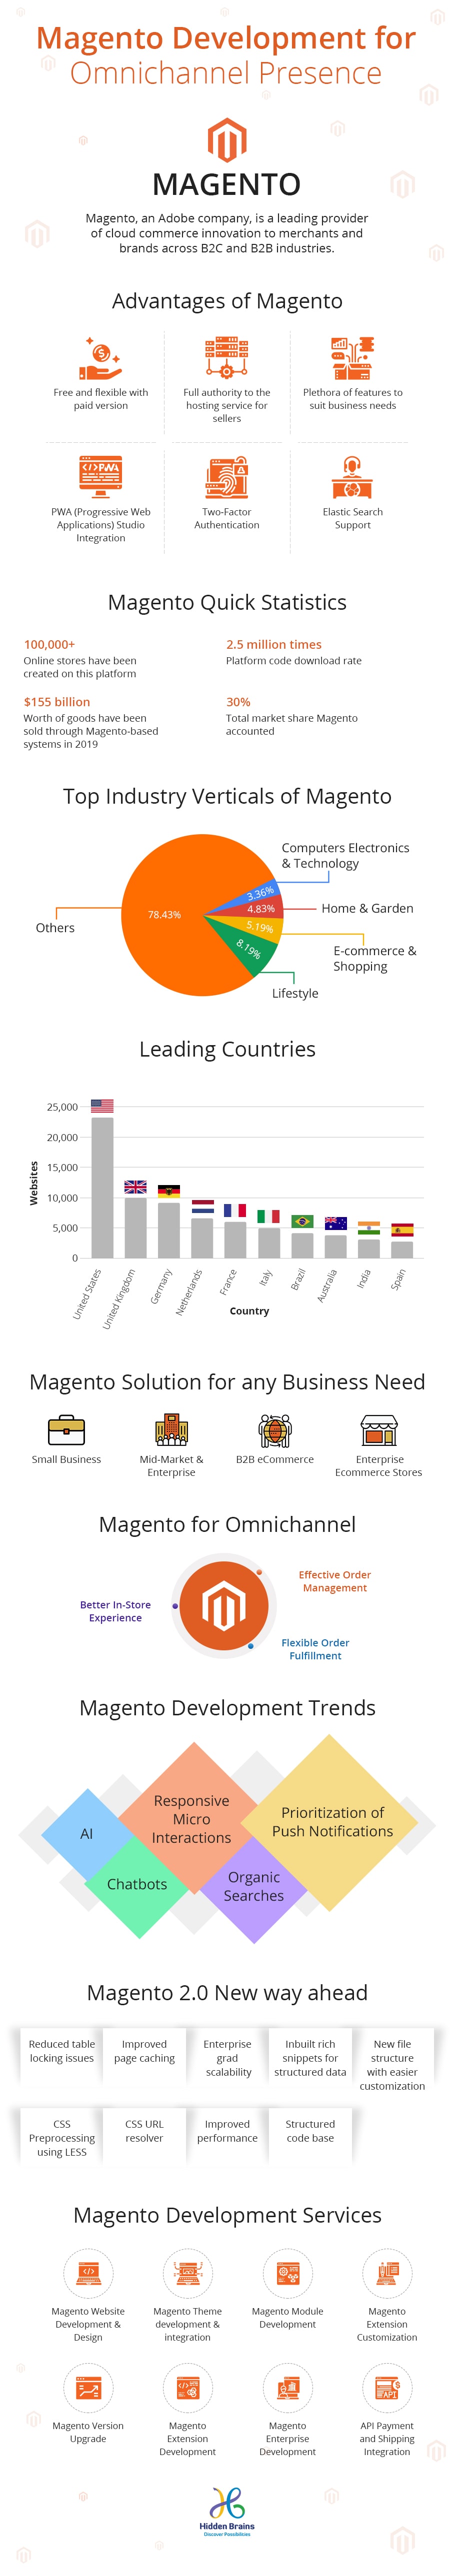 Maximize Omnichannel Experience with Magento